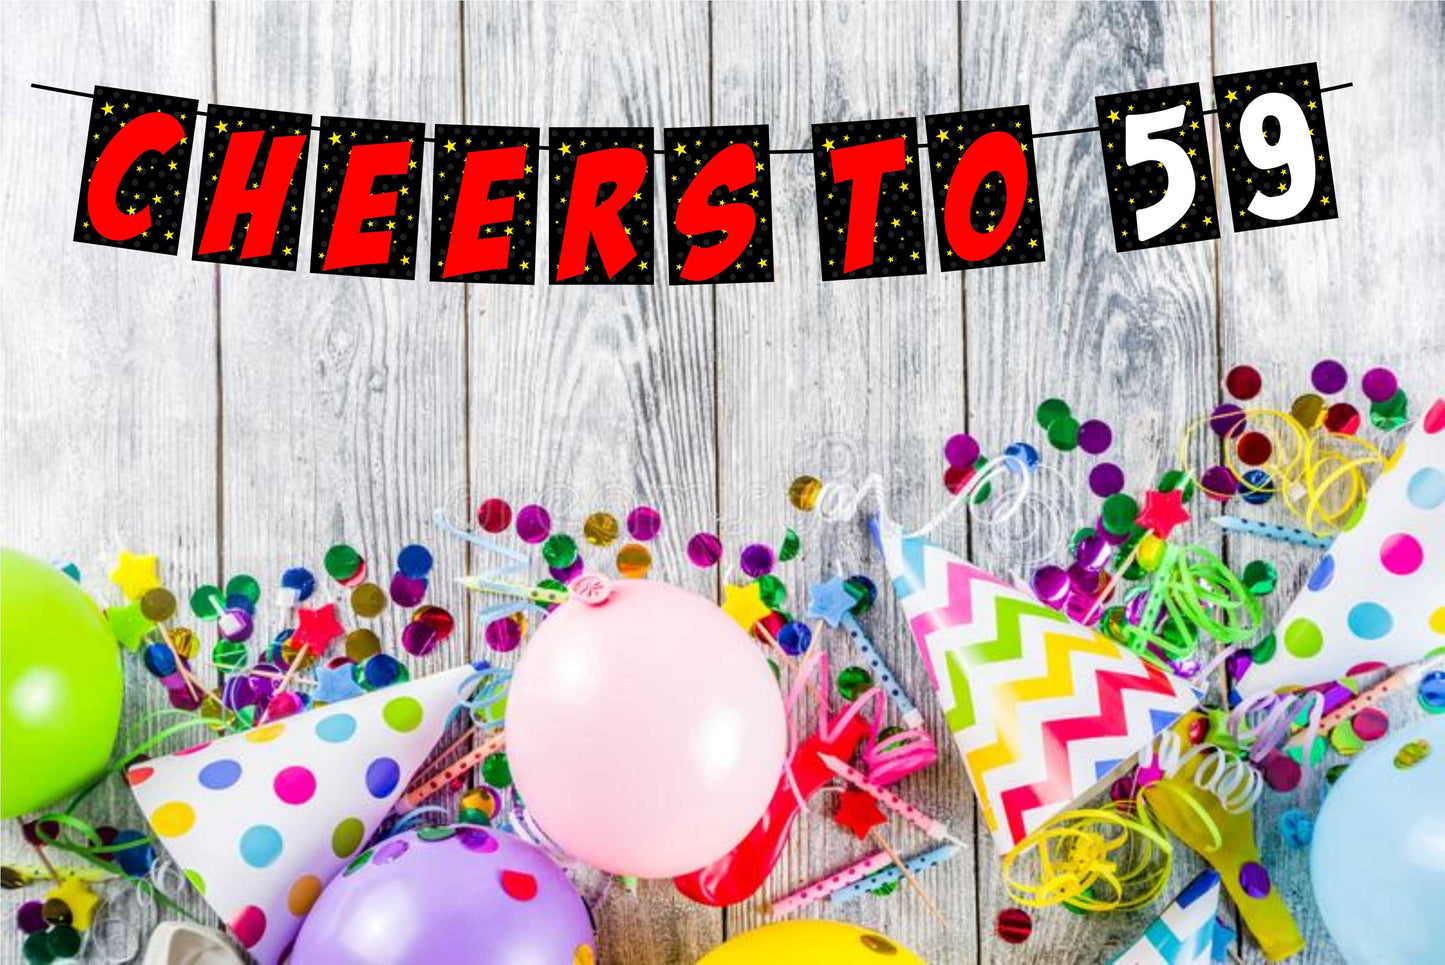 Cheers to 59 Birthday Banner for Photo Shoot Backdrop and Theme Party